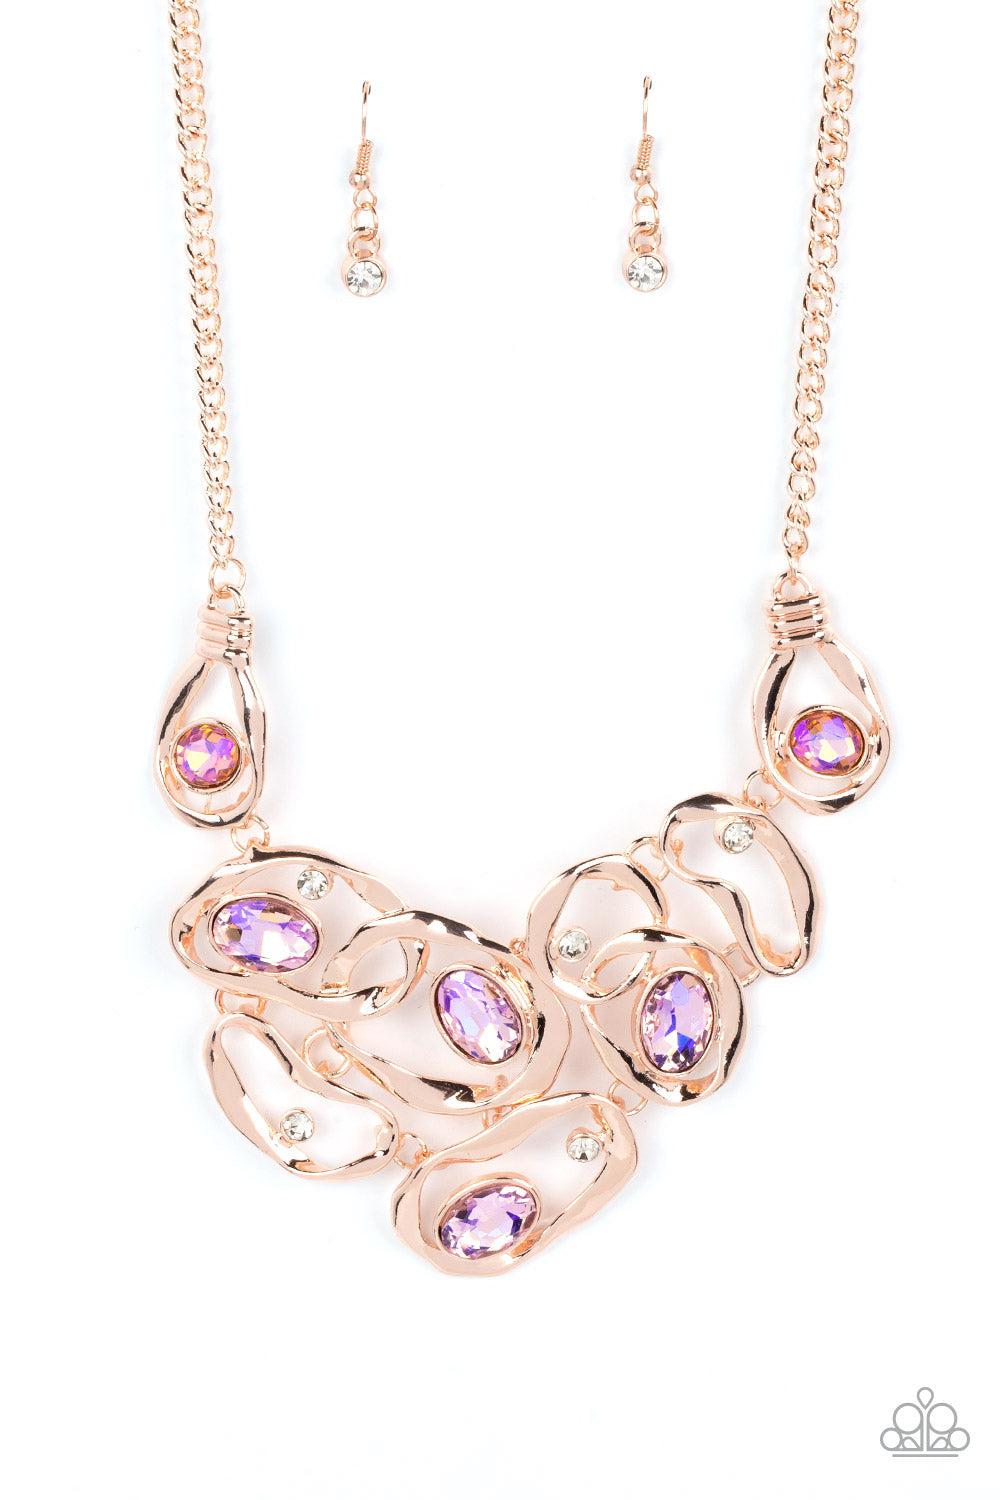 Warp Speed Rose Gold and Iridescent Rhinestone Necklace - Paparazzi Accessories- lightbox - CarasShop.com - $5 Jewelry by Cara Jewels